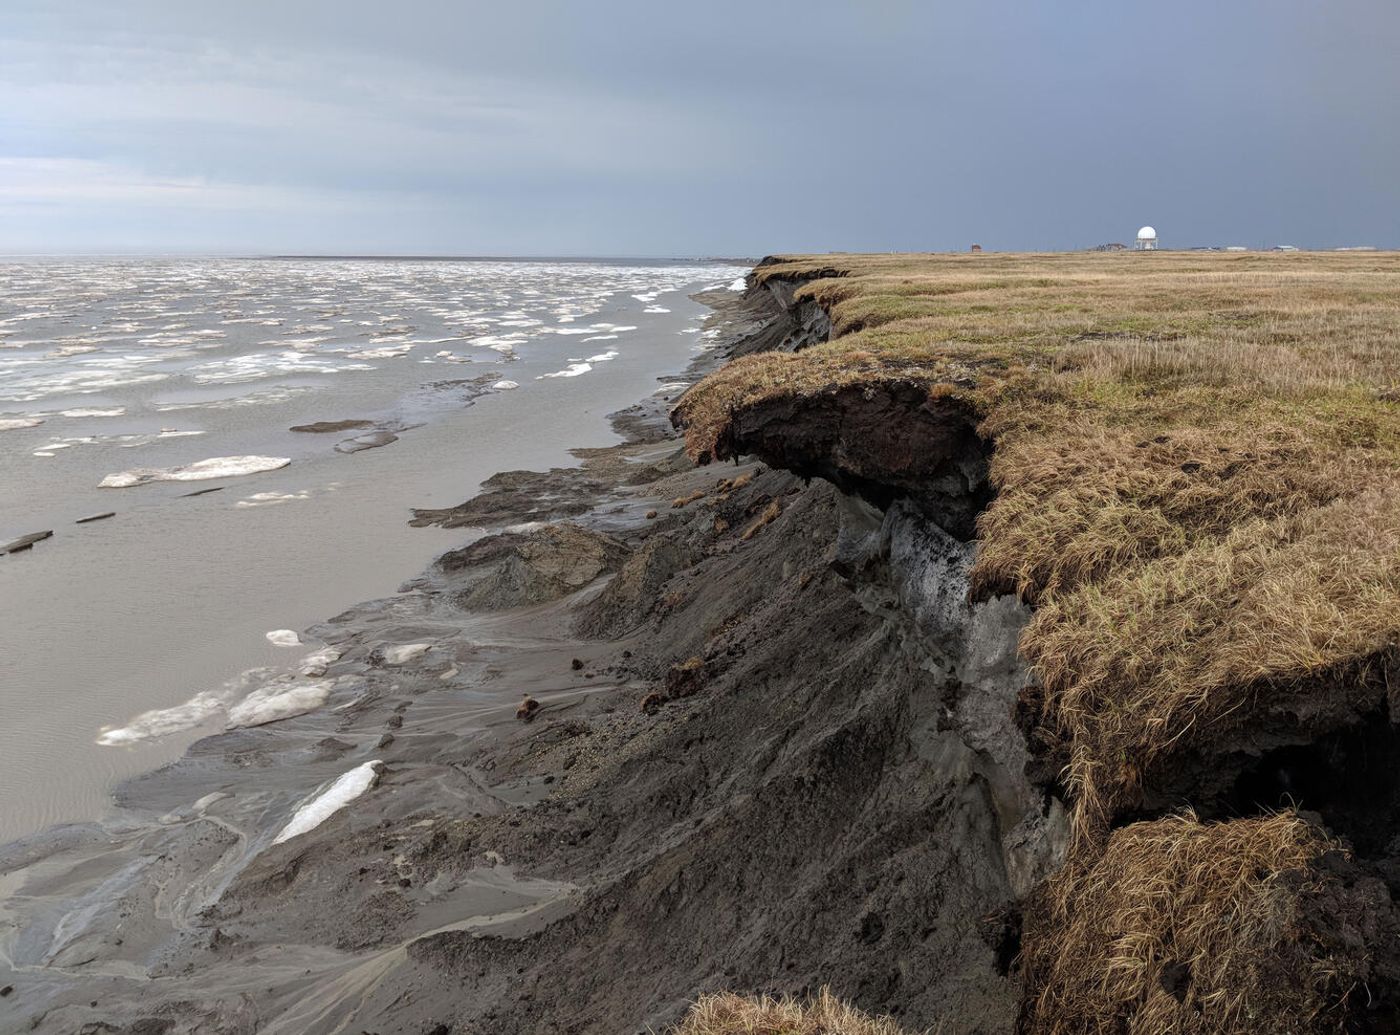 View facing east of an actively eroding coastal permafrost bluff on Barter Island, on the northern coast of Alaska. / Photo Credit: Shawn Harrison, Oceanographer, USGS Pacific Coastal and Marine Science Center